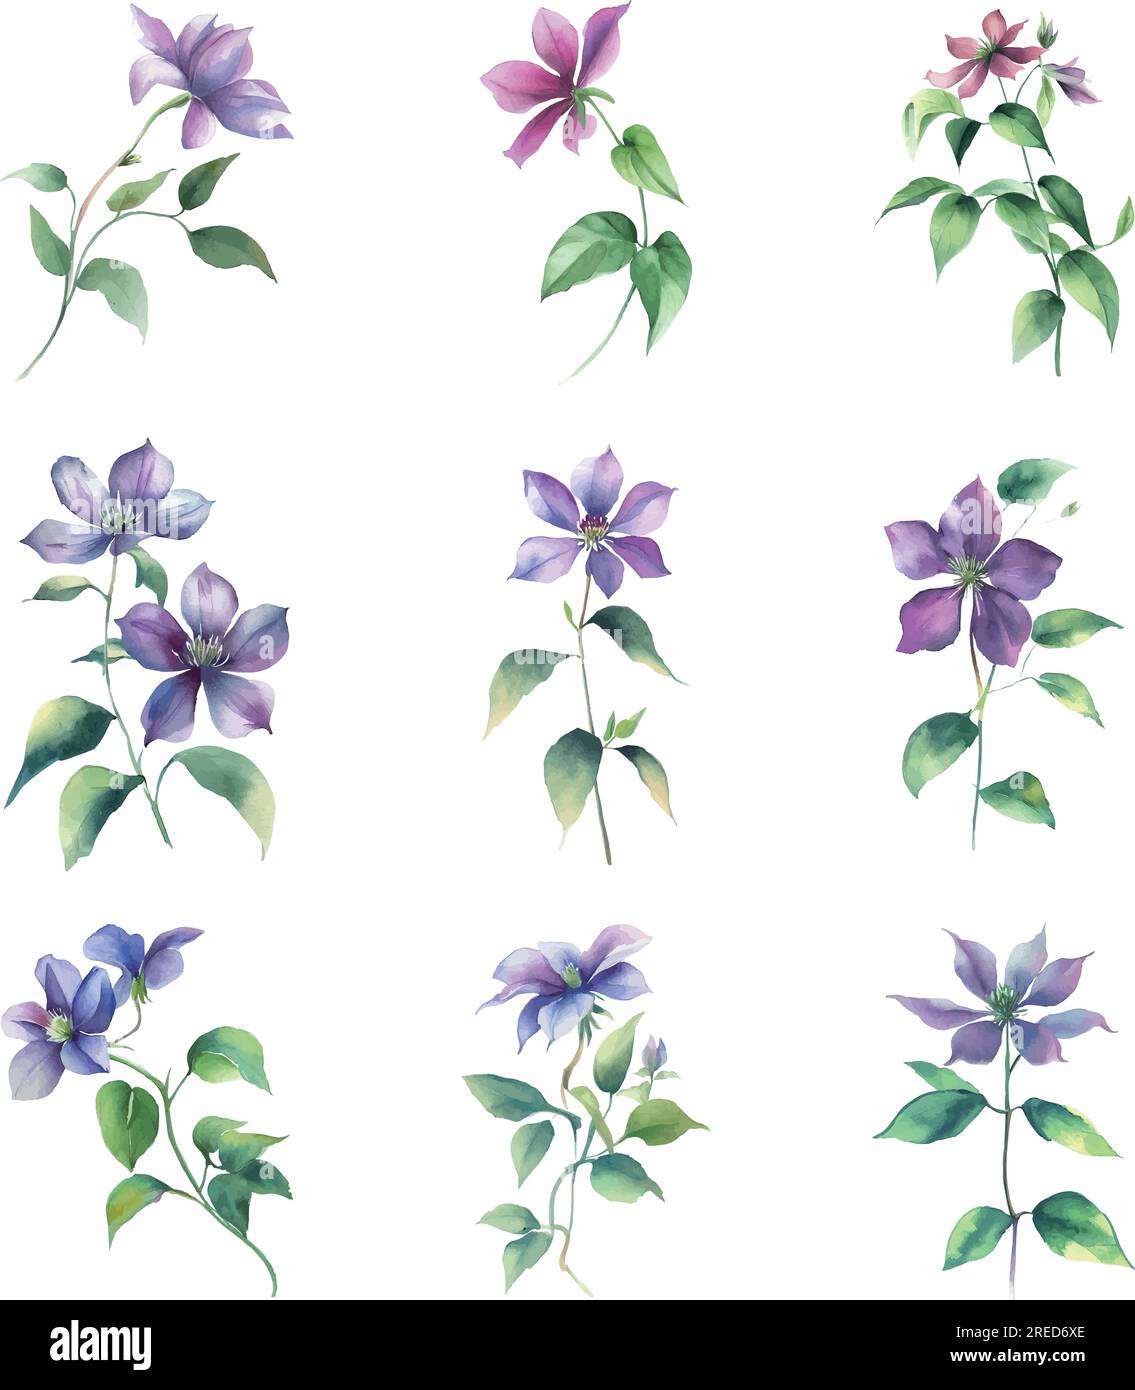 Clematis.Watercolor illustration of a bouquet of clematis flowers. Stock Vector